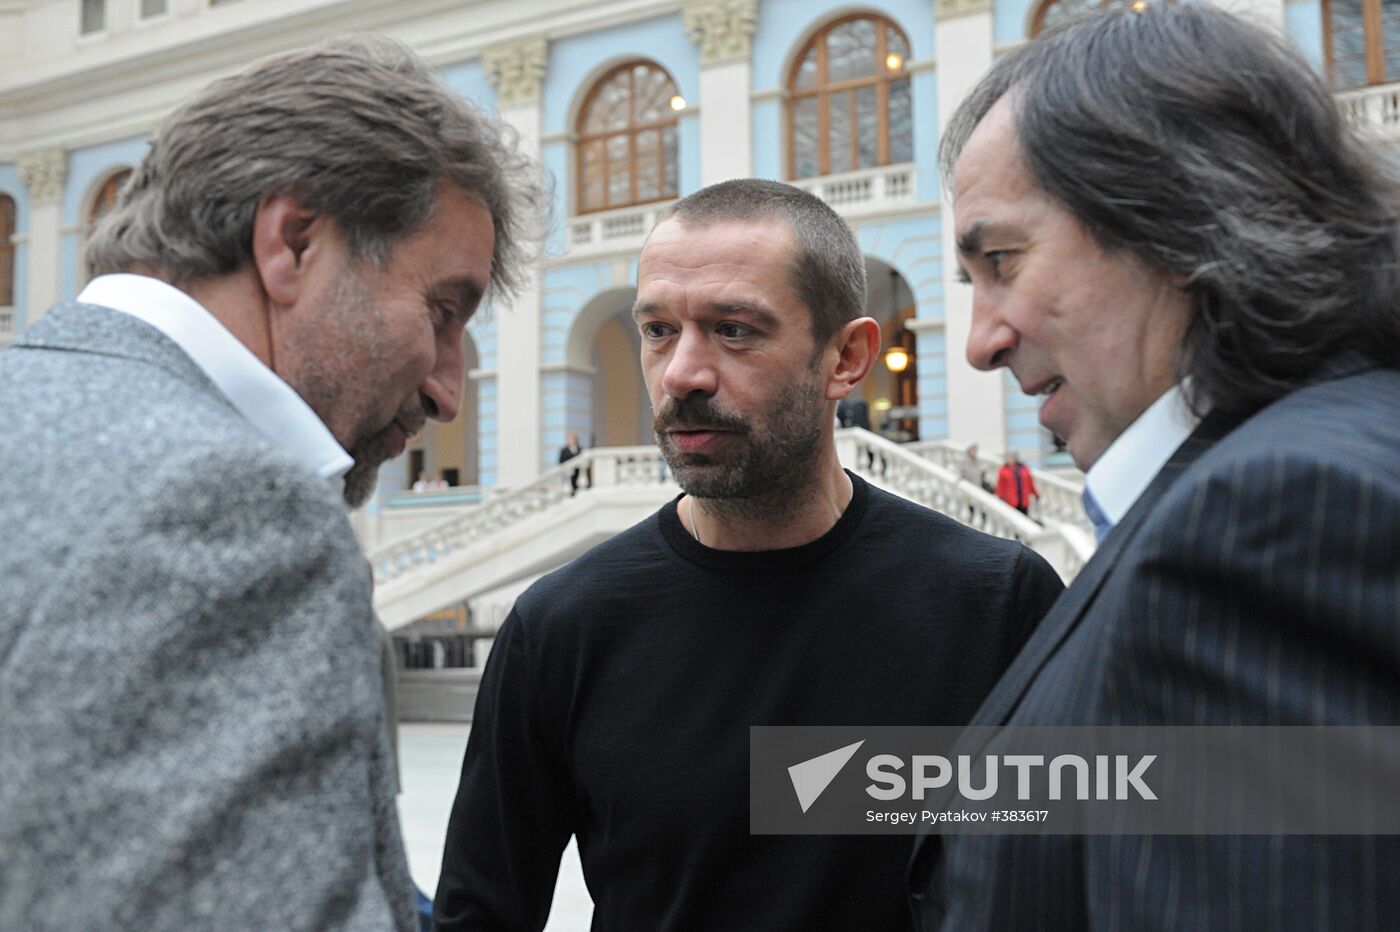 Union of Russian Film Makers convenes for extraordinary congress